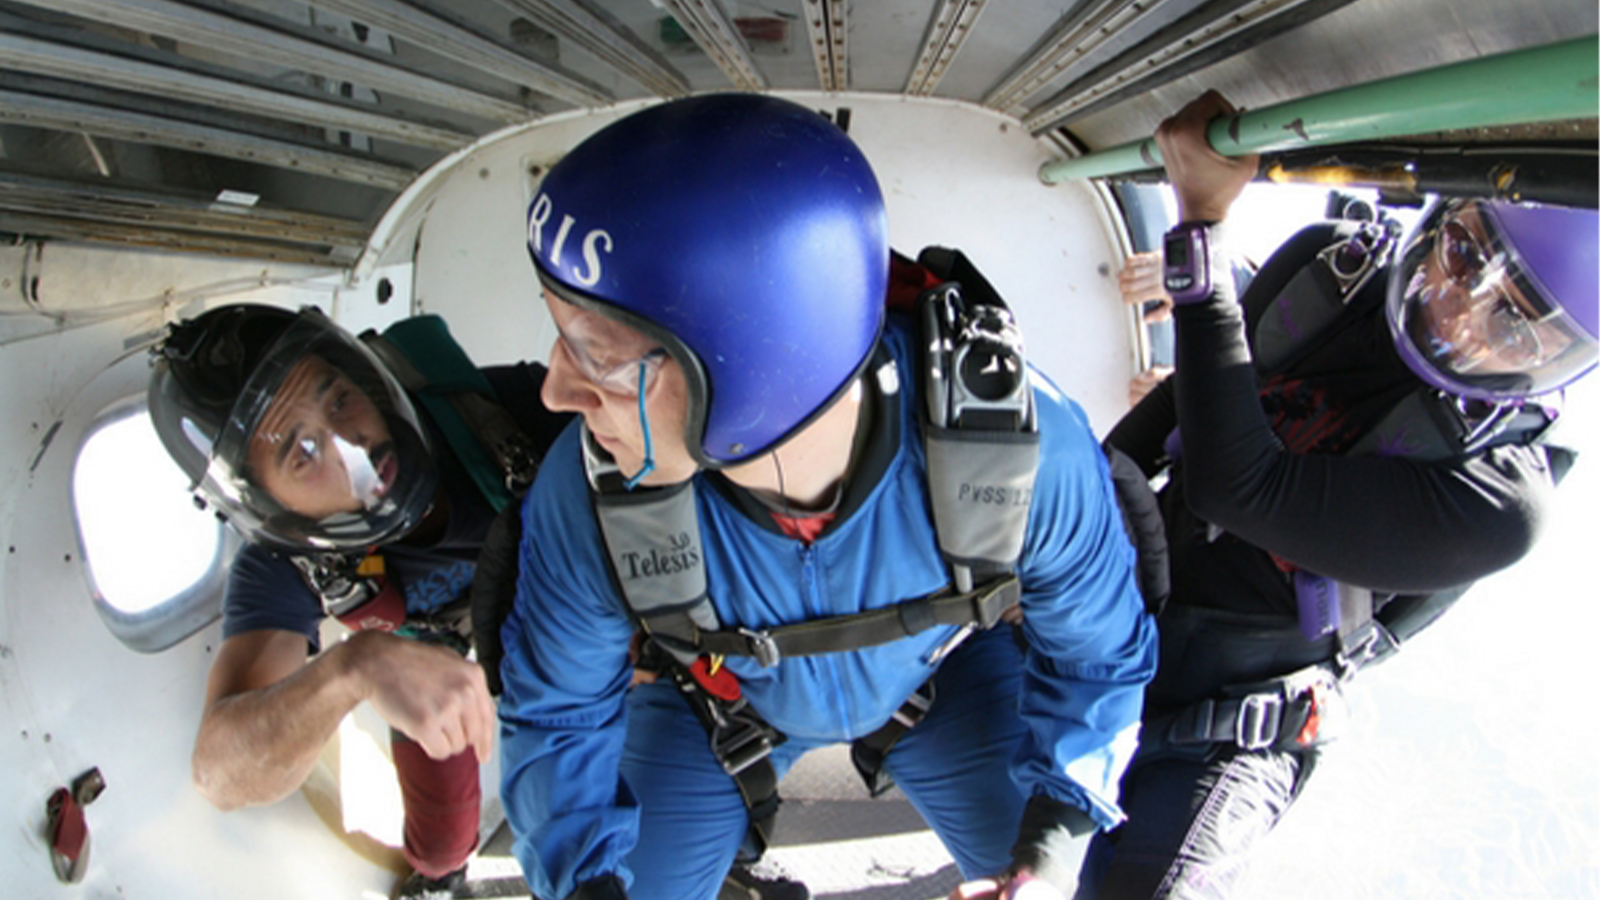 A skydiver prepares to jump from the plane.